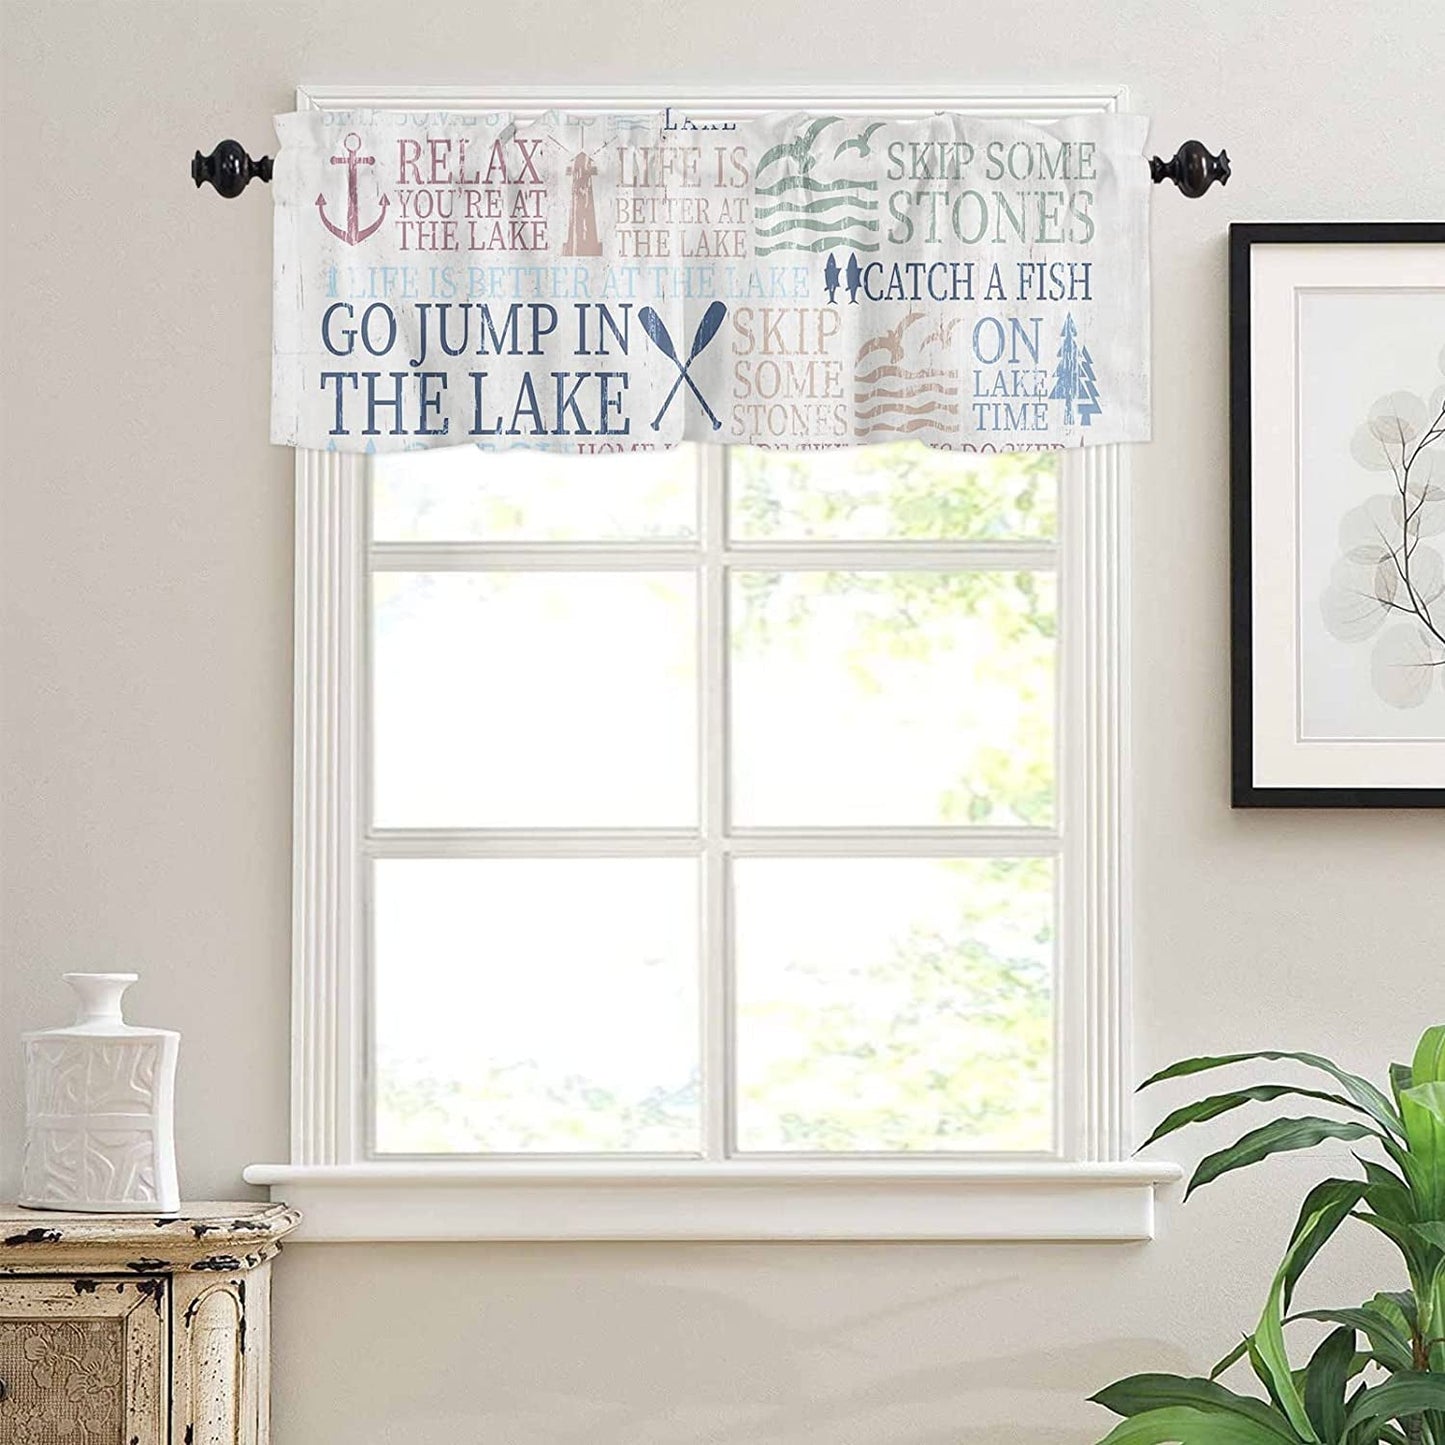 Nautical Anchor Sailboat Tie up Valance for Kitchen Windows, Adjustable Window Shade Valance Kitchen Curtains Window Topper Short Curtain for Living Room, Lake Life Theme Rod Pocket Drape 54"X18"